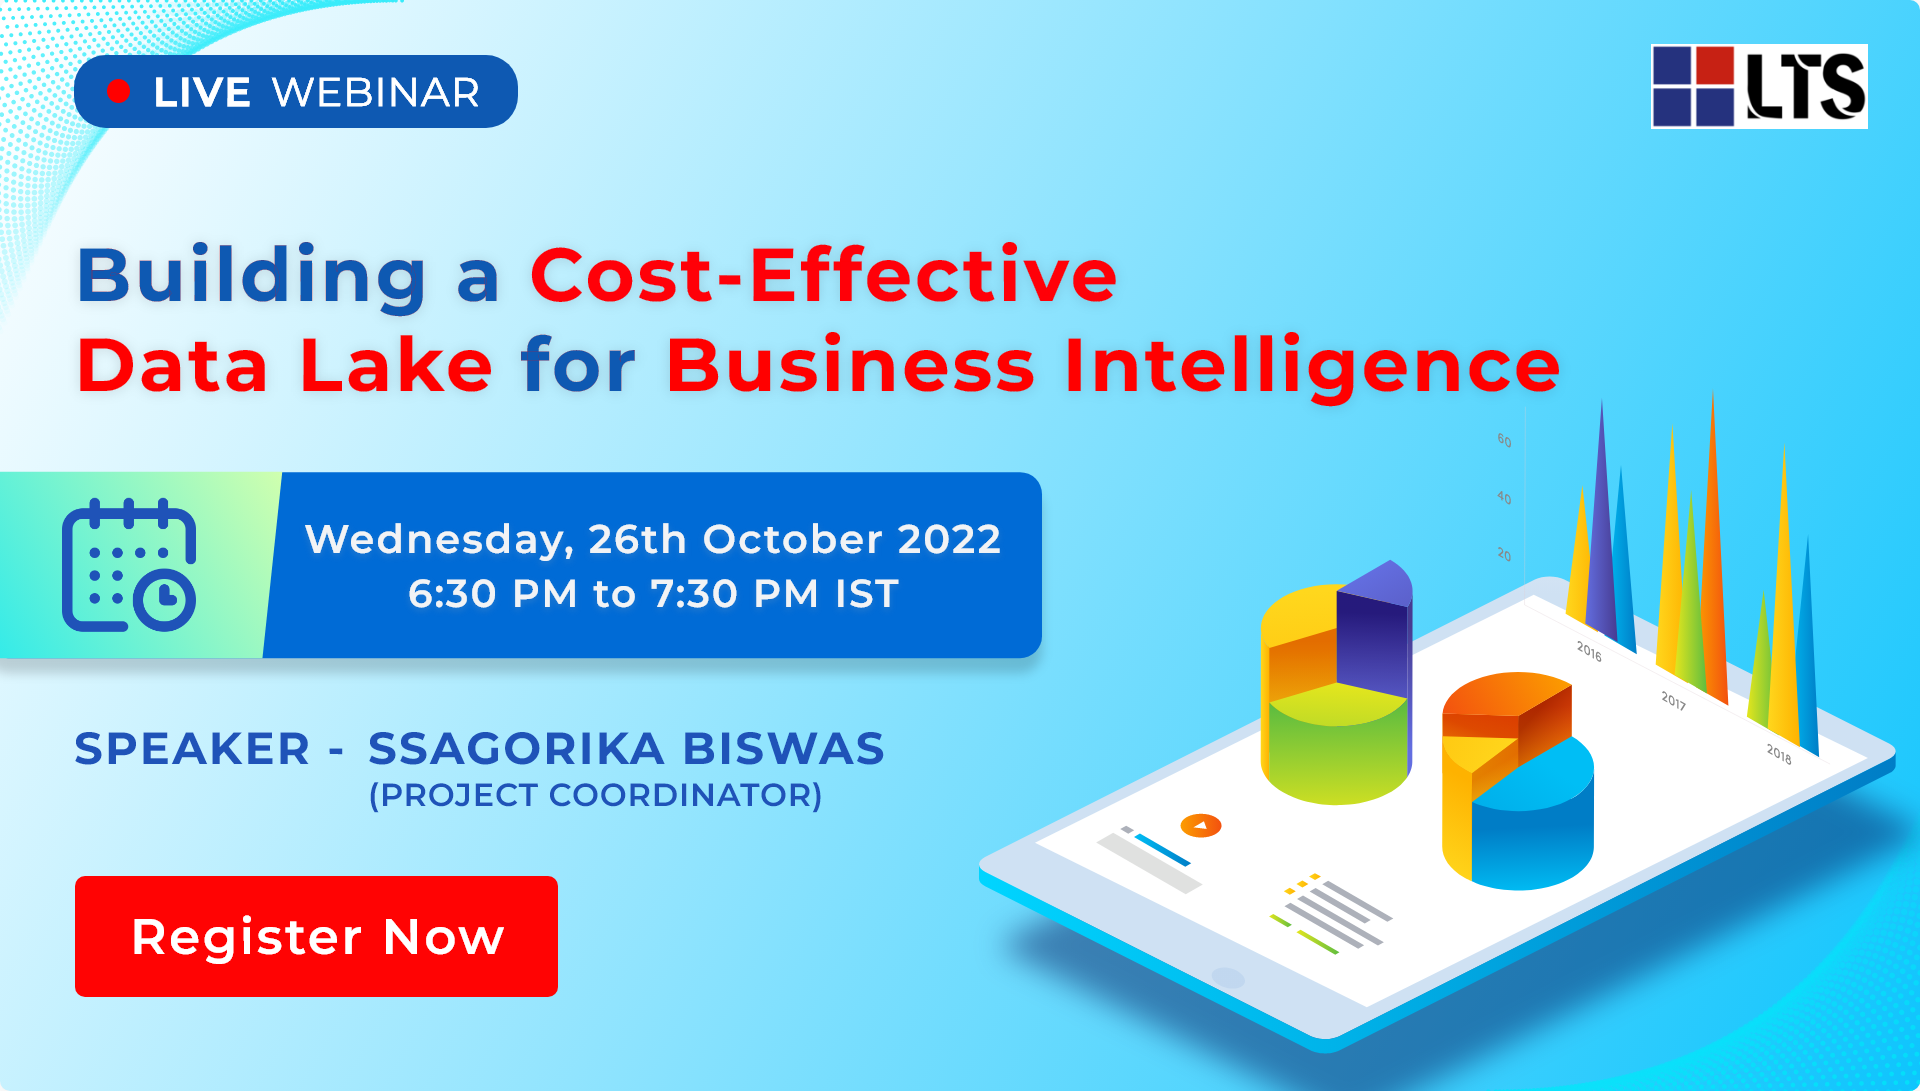 Building a Cost-Effective Data Lake for Business Intelligence